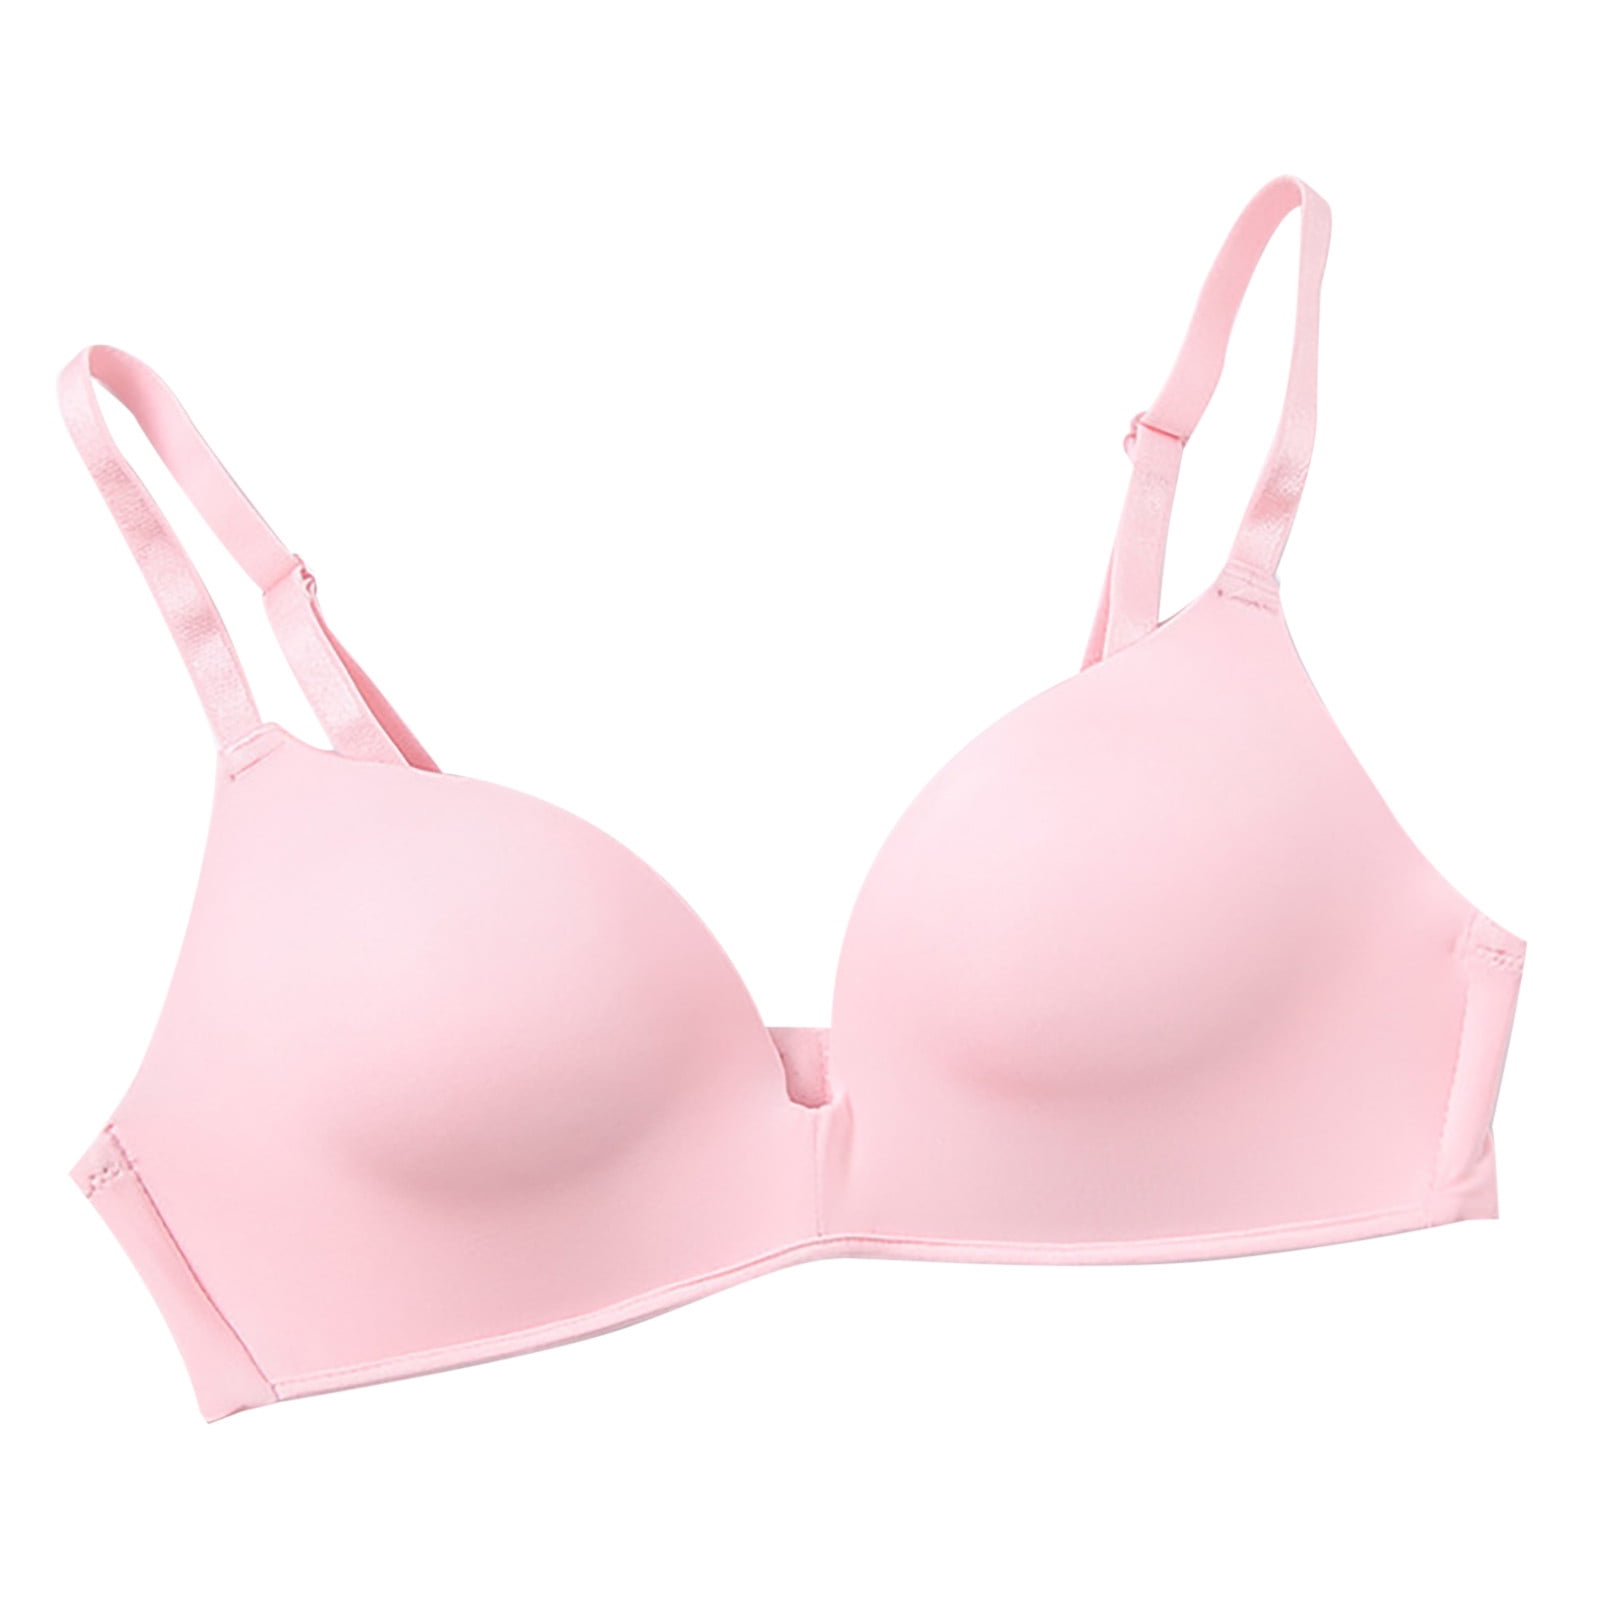 Silk Satin Triangle Cup Bras for Women Girls Teens Small Breast